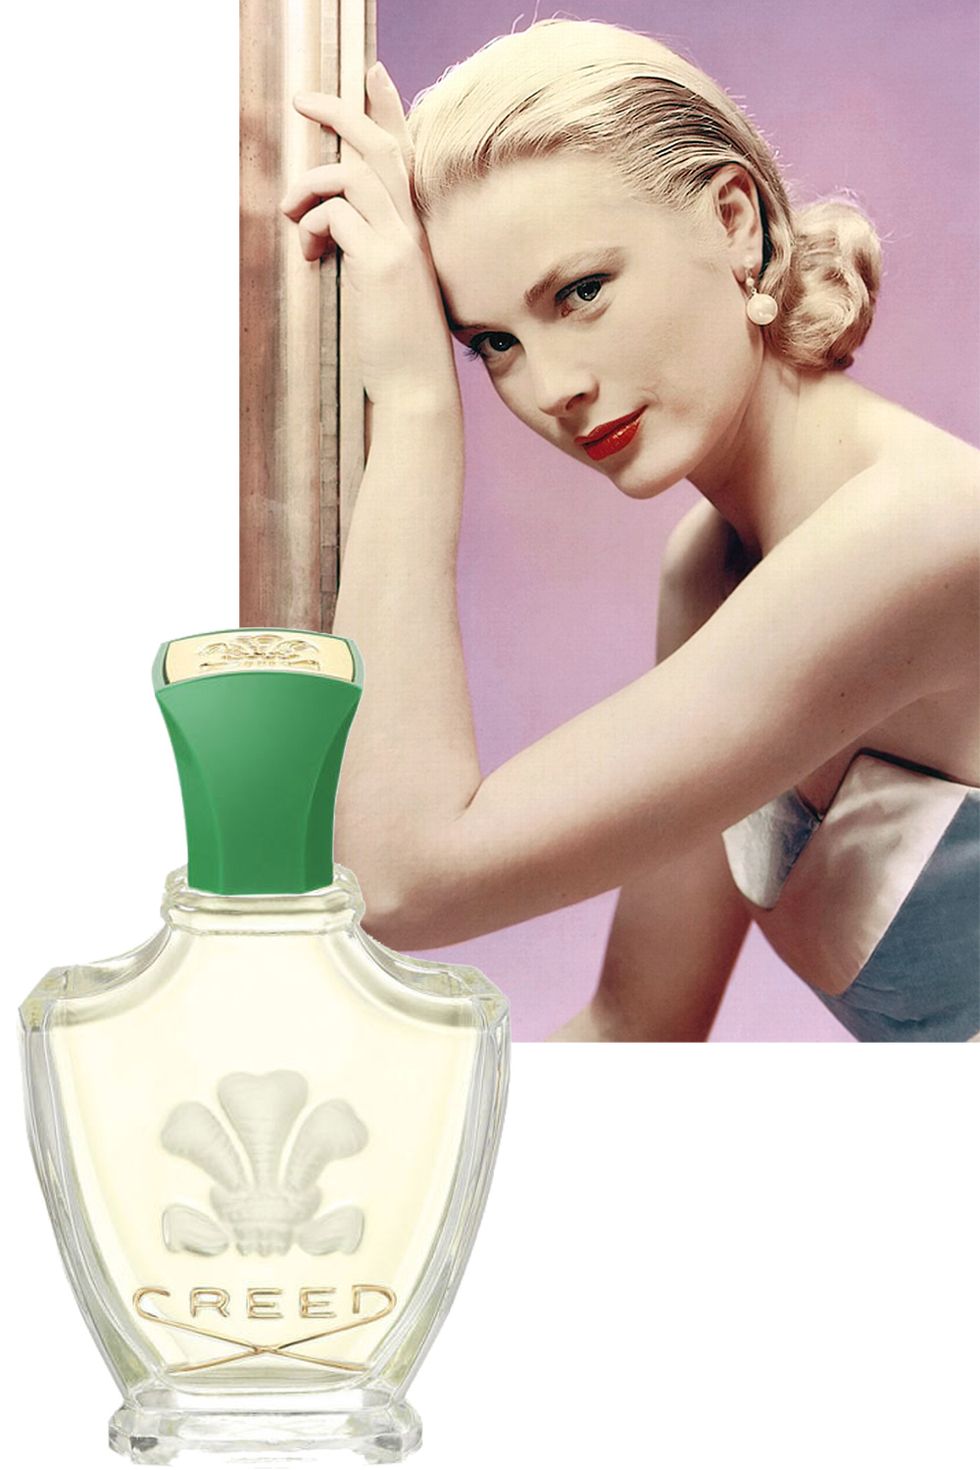 <p>Actress Grace Kelly fulfilled the&nbsp;ultimate Hollywood story when she married Prince Rainier III, becoming the Princess of Monaco. On her wedding day, Kelly wore Creed Fleurissimo perfume, a powdery floral scent,&nbsp;which had been commissioned for the occasion.&nbsp;</p>